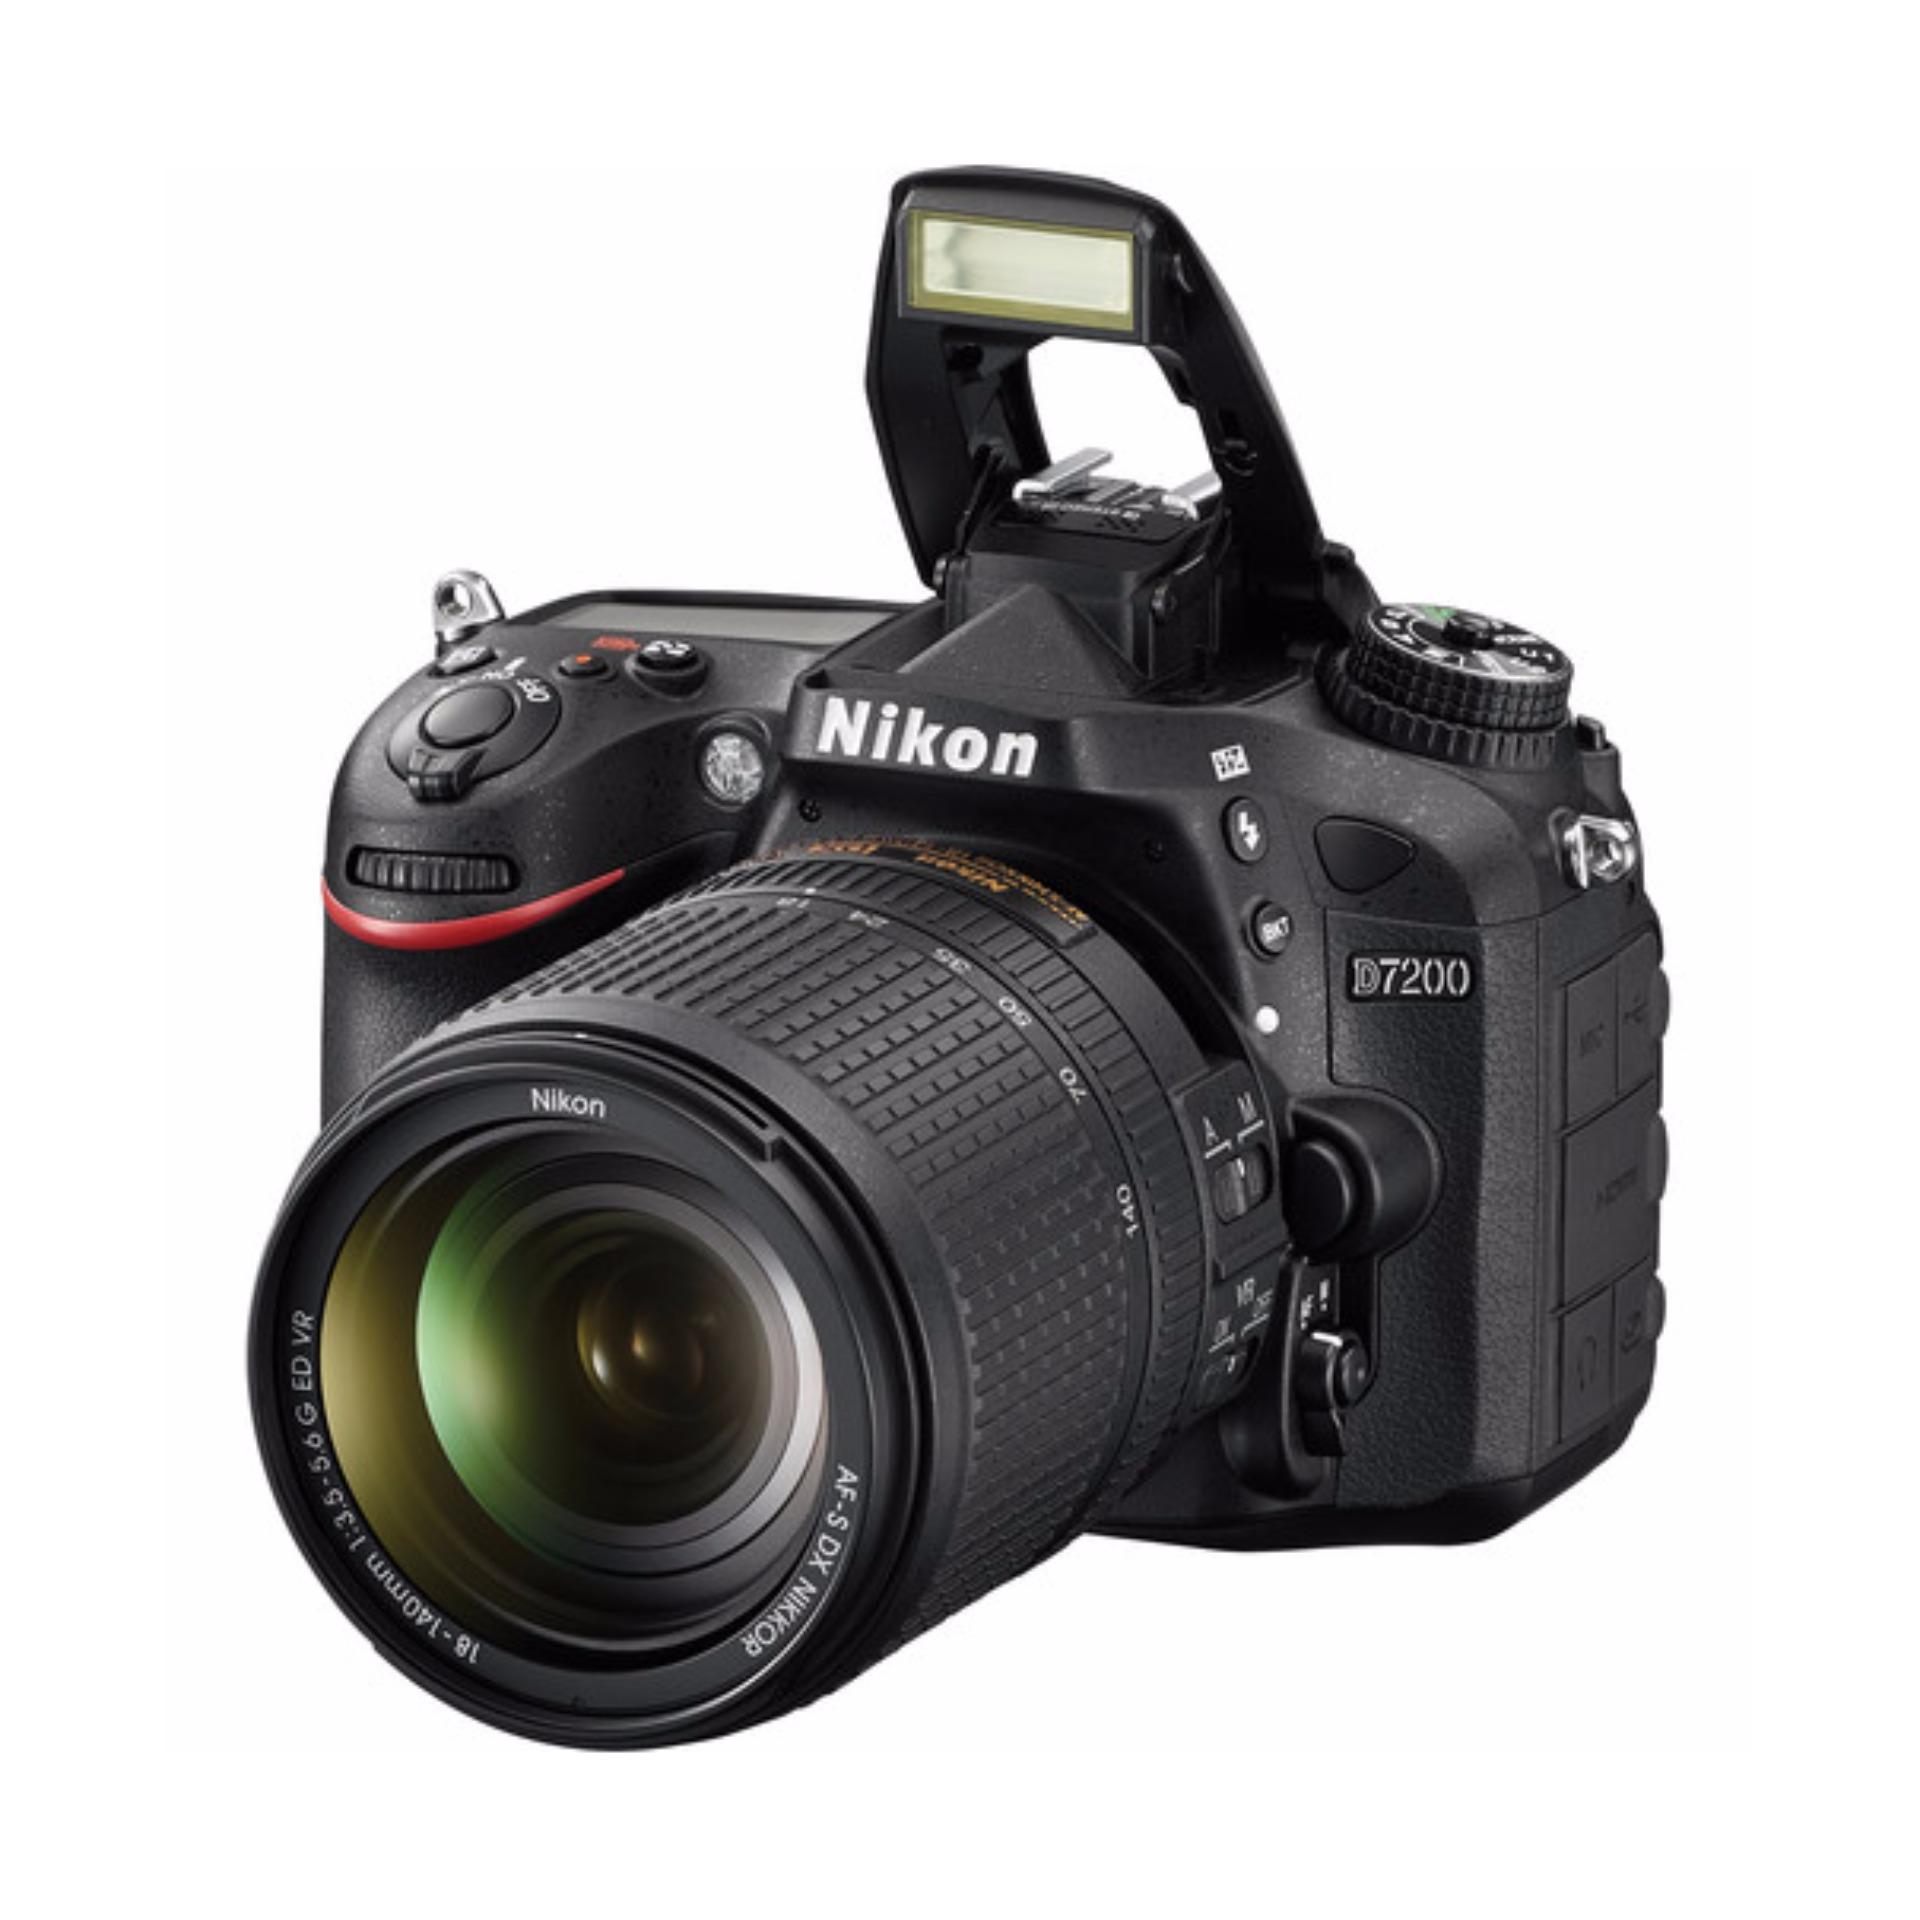 Nikon D7200 DSLR Camera with 18-140mm Lens export only